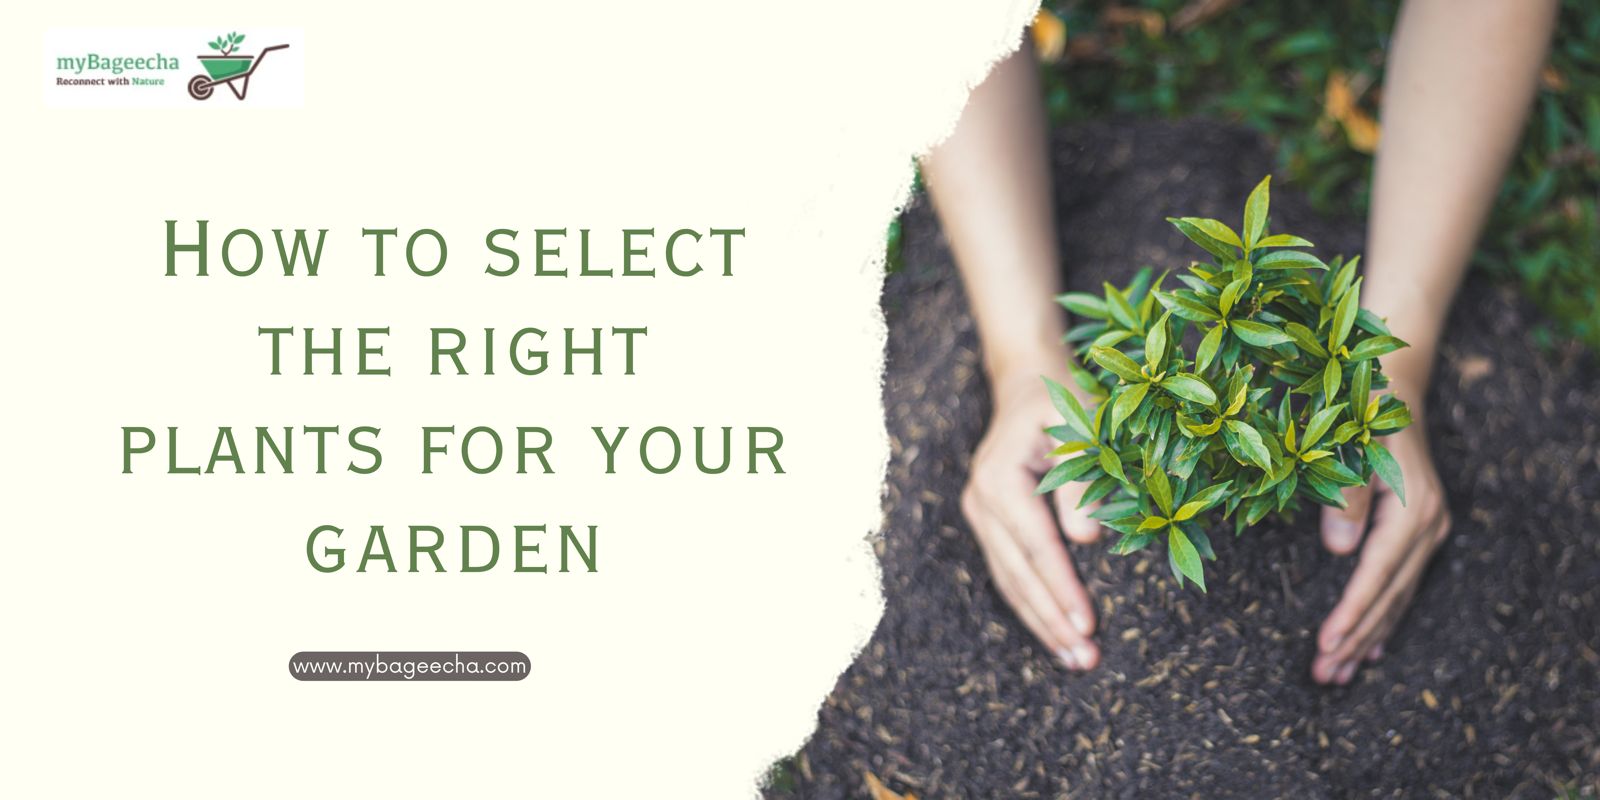 How to select the right plants for your garden